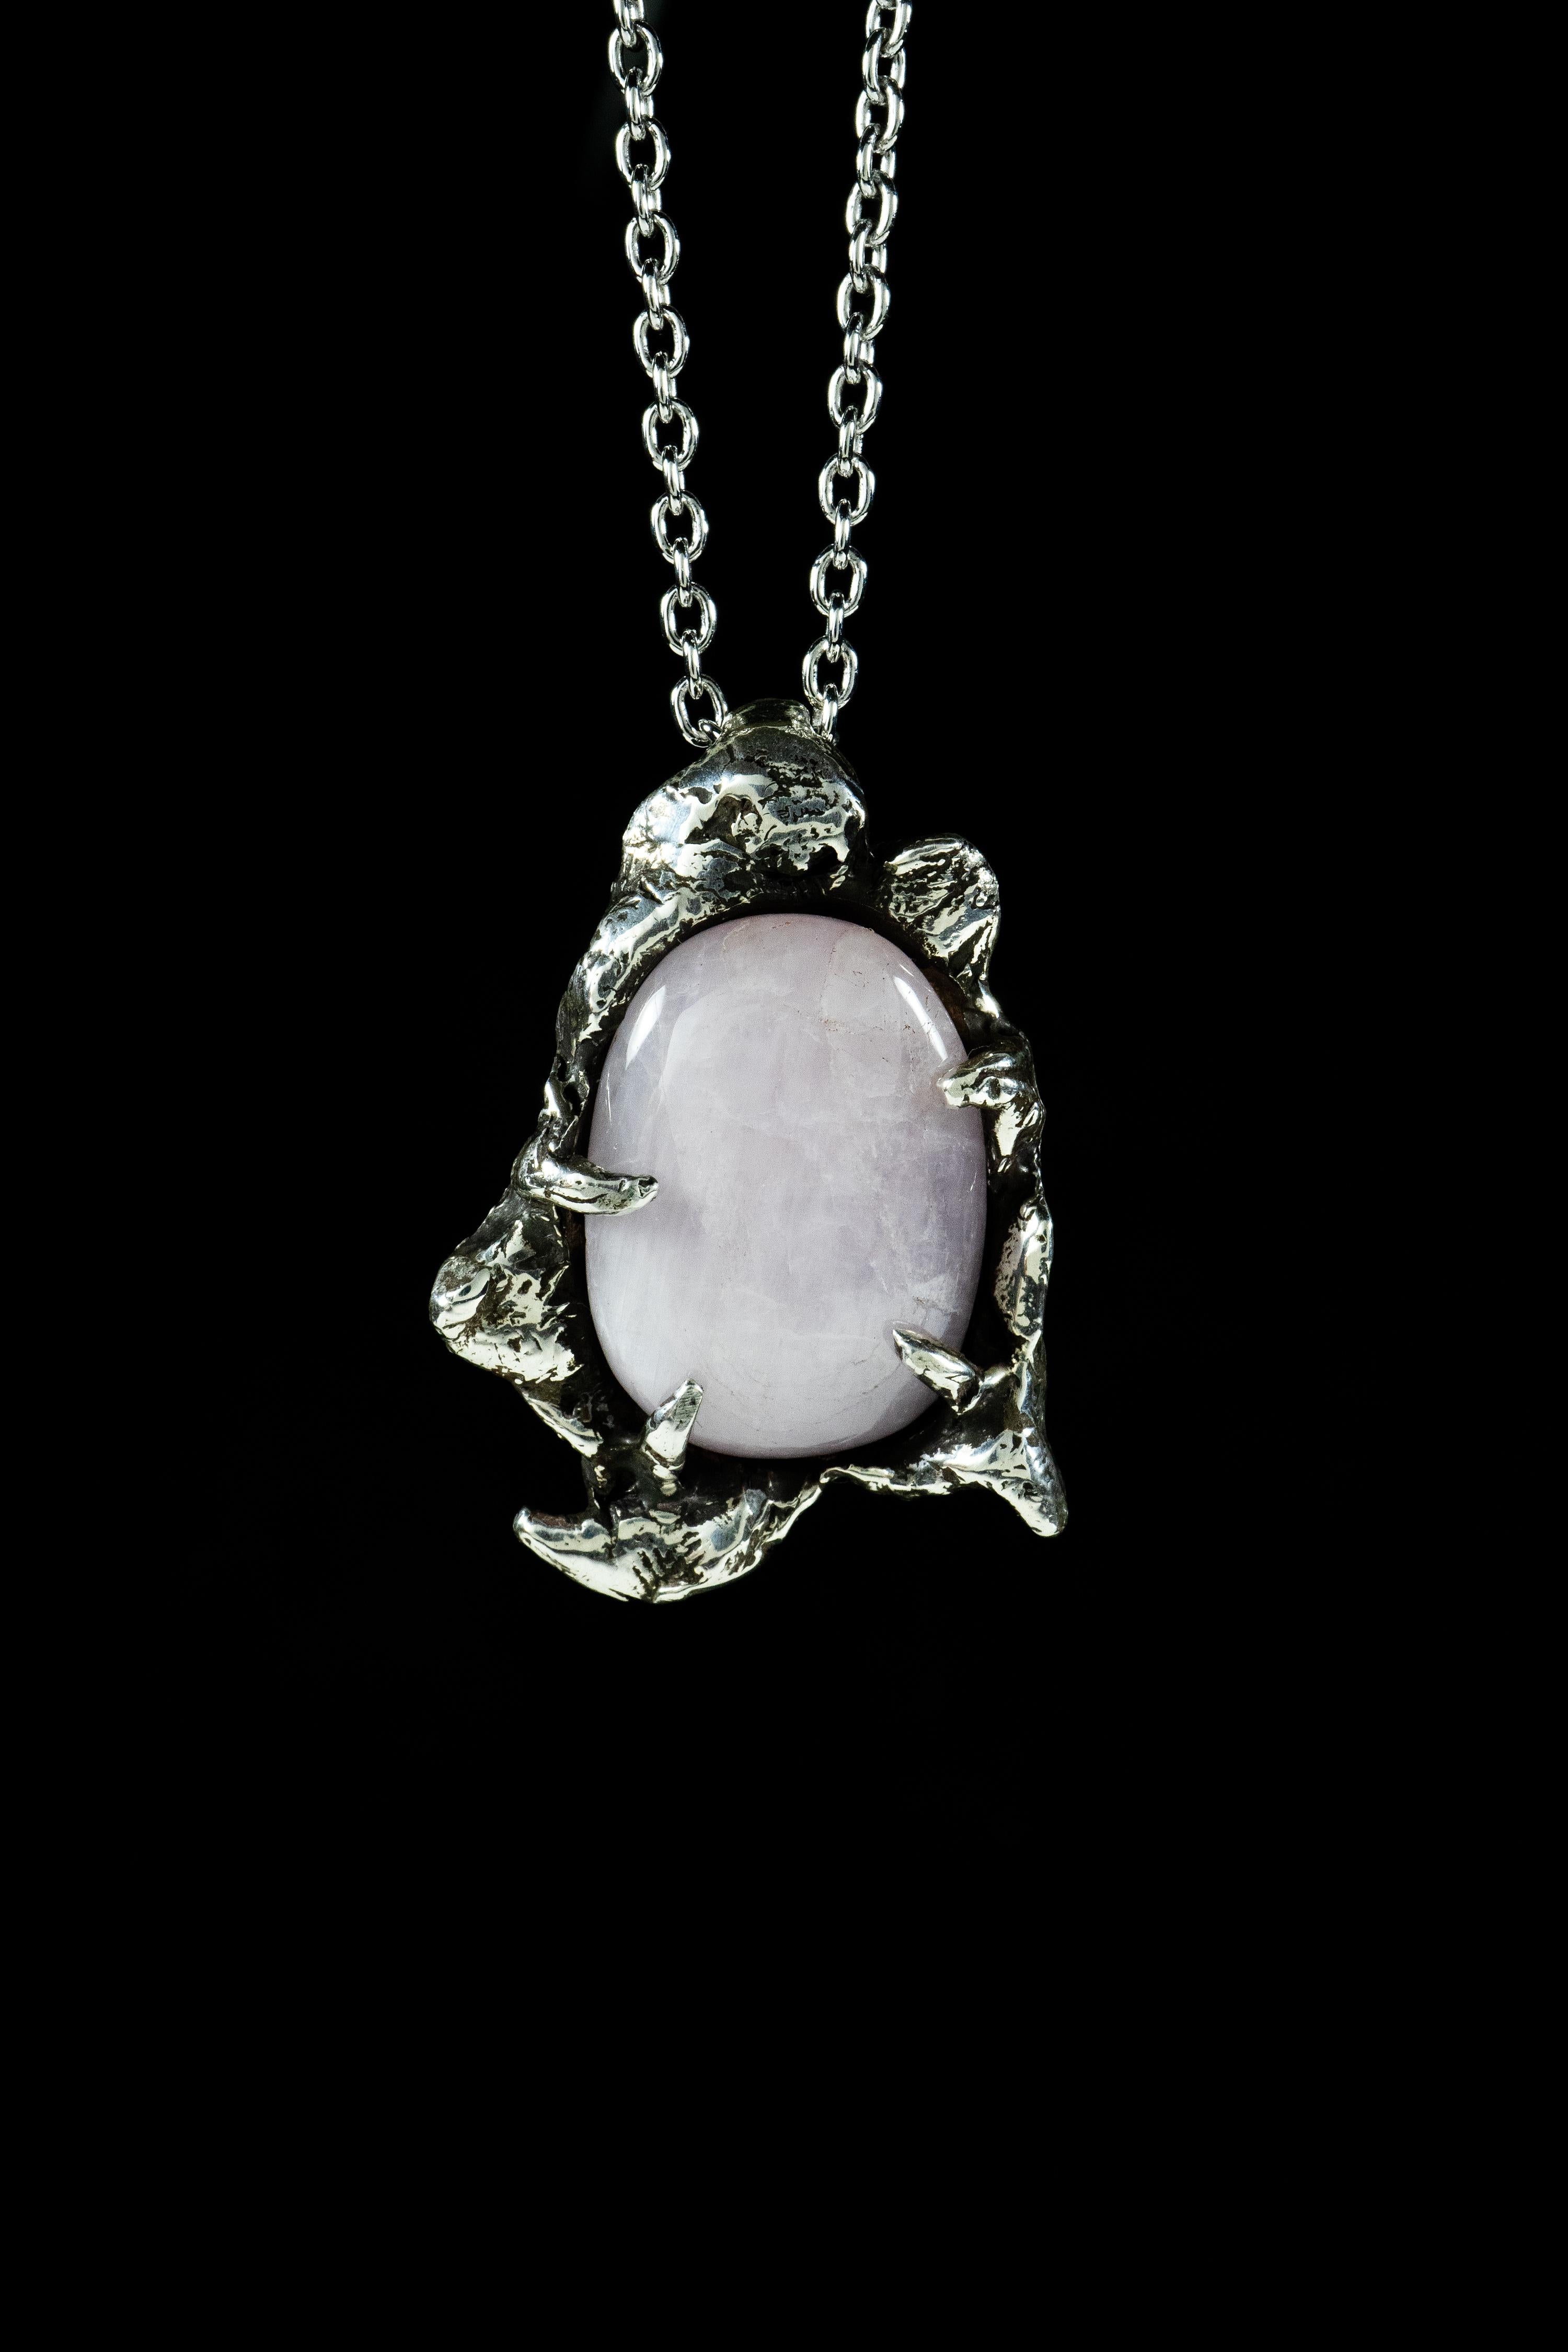 Internal is a one-of-a-kind pendant by Ken Fury that is hand-carved and cast in sterling silver and features a natural Rose Quartz stone.

Size of piece: 35mm x 24mm

Hand-signed

Includes a 24-inch sterling silver chain.